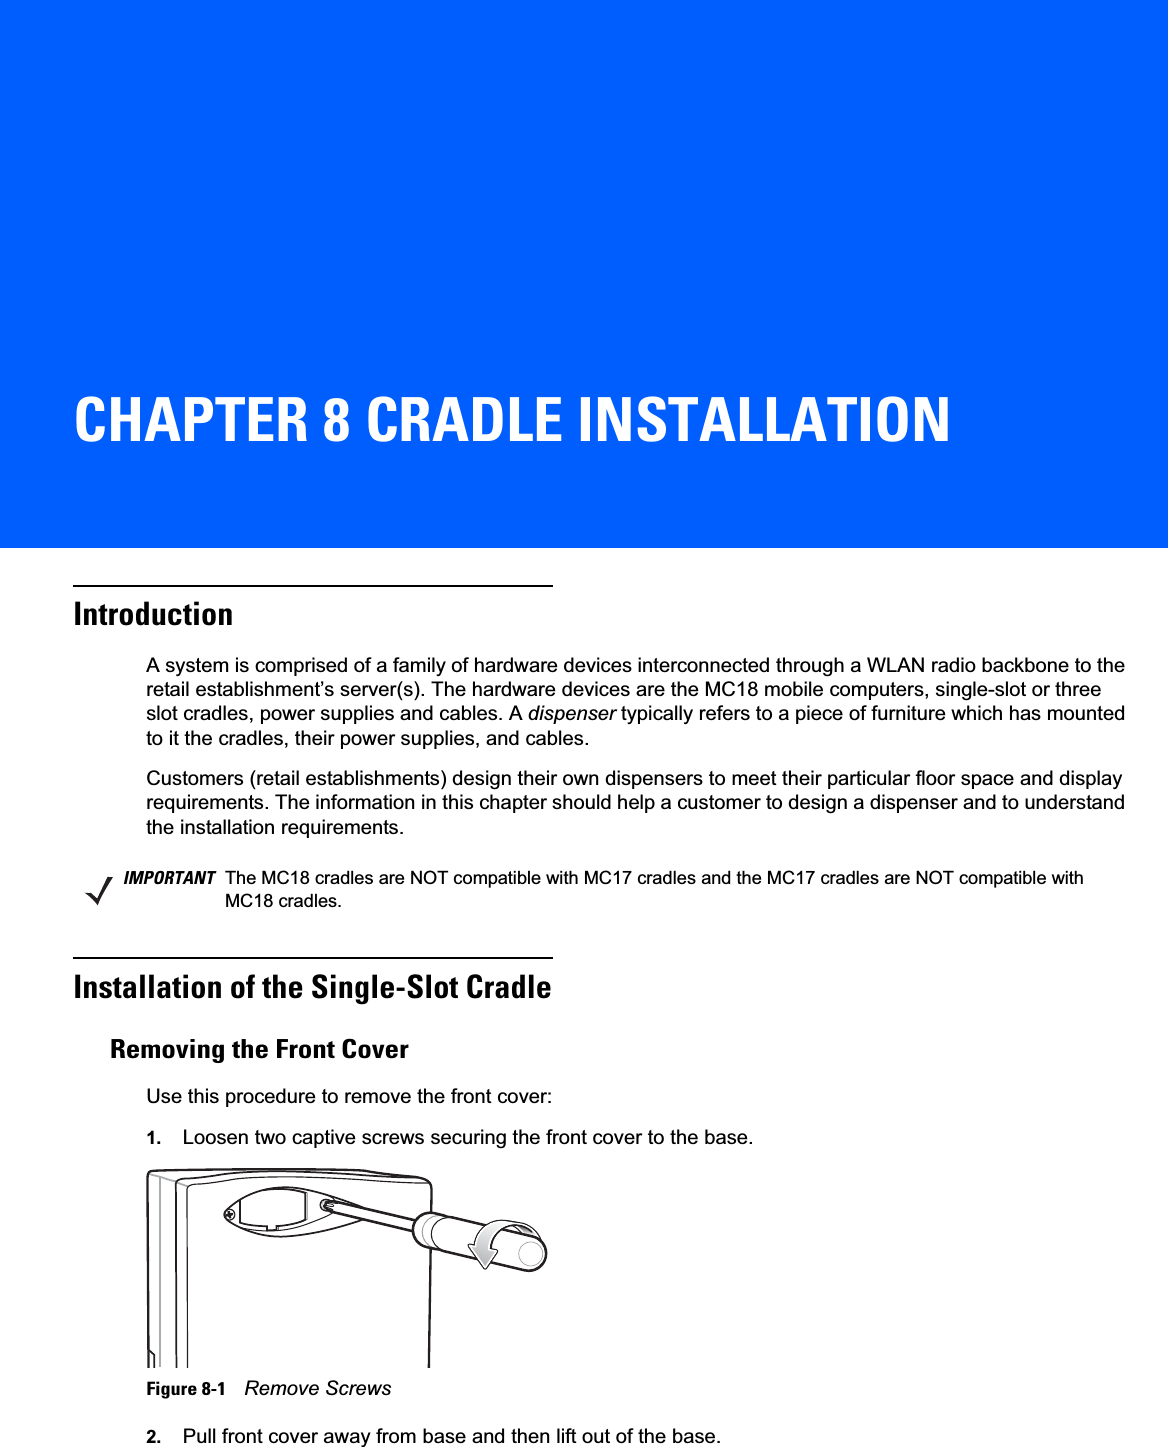 CHAPTER 8 CRADLE INSTALLATIONIntroductionA system is comprised of a family of hardware devices interconnected through a WLAN radio backbone to the retail establishment’s server(s). The hardware devices are the MC18 mobile computers, single-slot or three slot cradles, power supplies and cables. A dispenser typically refers to a piece of furniture which has mounted to it the cradles, their power supplies, and cables.Customers (retail establishments) design their own dispensers to meet their particular floor space and display requirements. The information in this chapter should help a customer to design a dispenser and to understand the installation requirements.Installation of the Single-Slot CradleRemoving the Front CoverUse this procedure to remove the front cover:1. Loosen two captive screws securing the front cover to the base.Figure 8-1    Remove Screws2. Pull front cover away from base and then lift out of the base.IMPORTANT The MC18 cradles are NOT compatible with MC17 cradles and the MC17 cradles are NOT compatible with MC18 cradles.